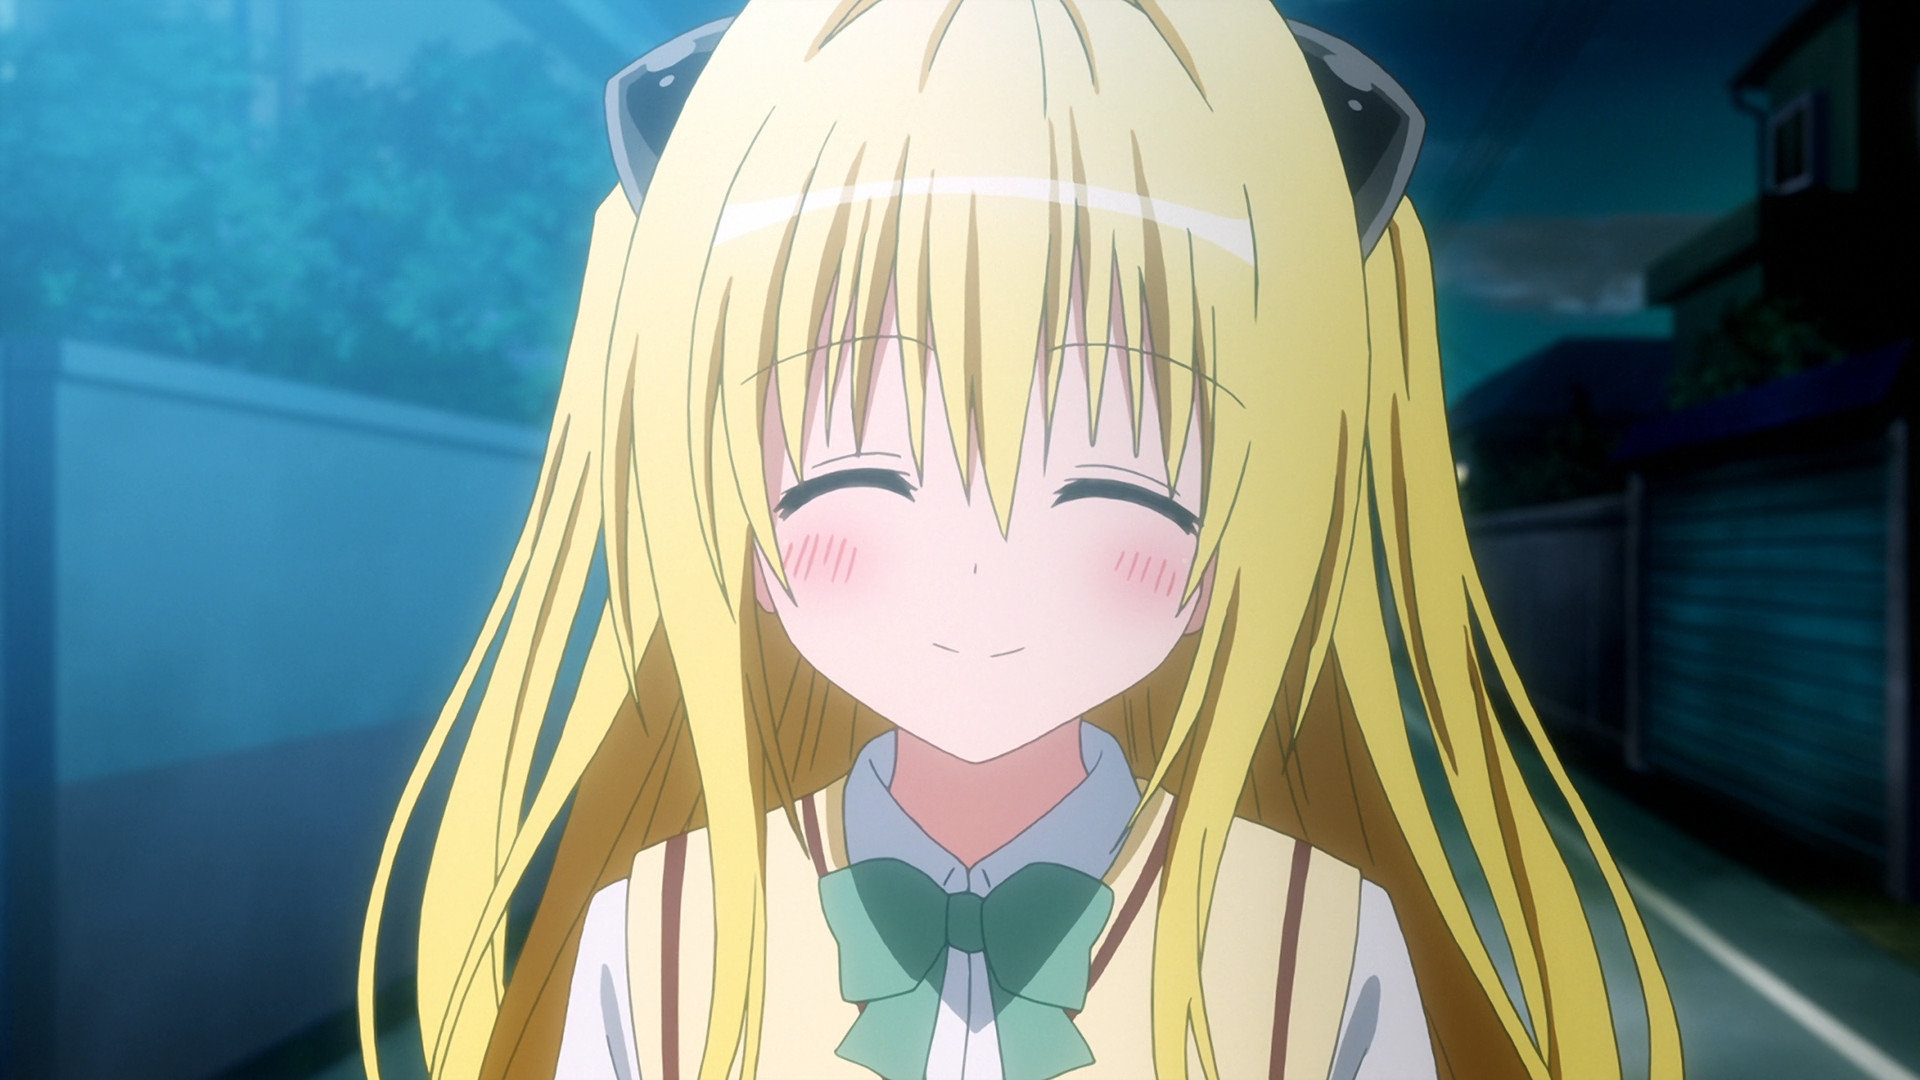 To Love Ru Wallpapers 1920x1080 Full Hd 1080p Desktop Backgrounds While scheming her plan, she confronts golden darkness also known as yami. to love ru wallpapers 1920x1080 full hd